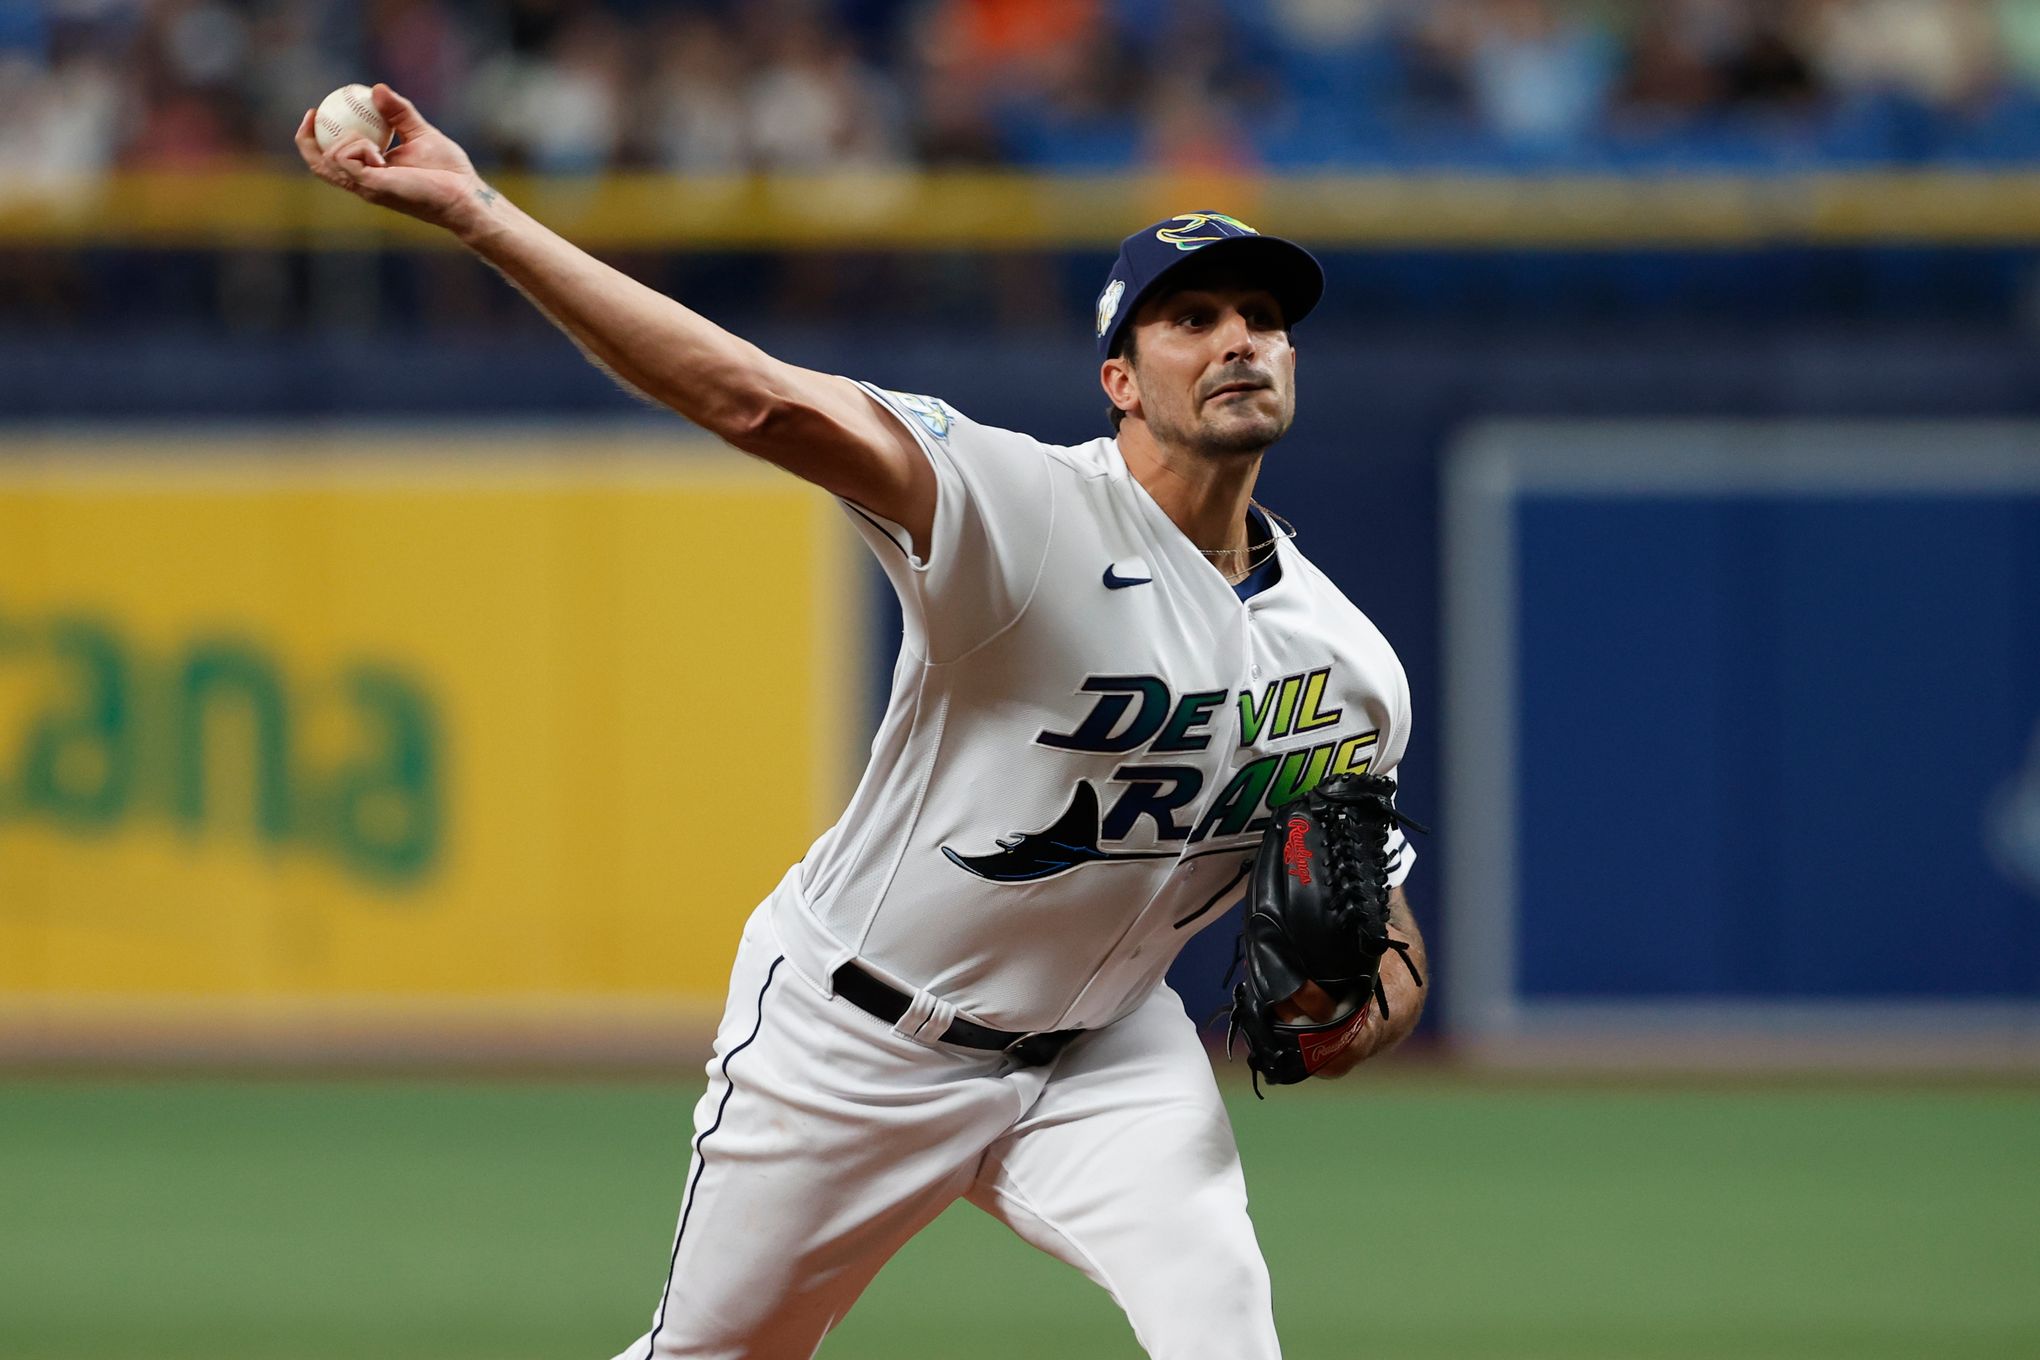 Eflin gets 11th win, Rays beat Orioles 3-0 in 2nd game of 4-game